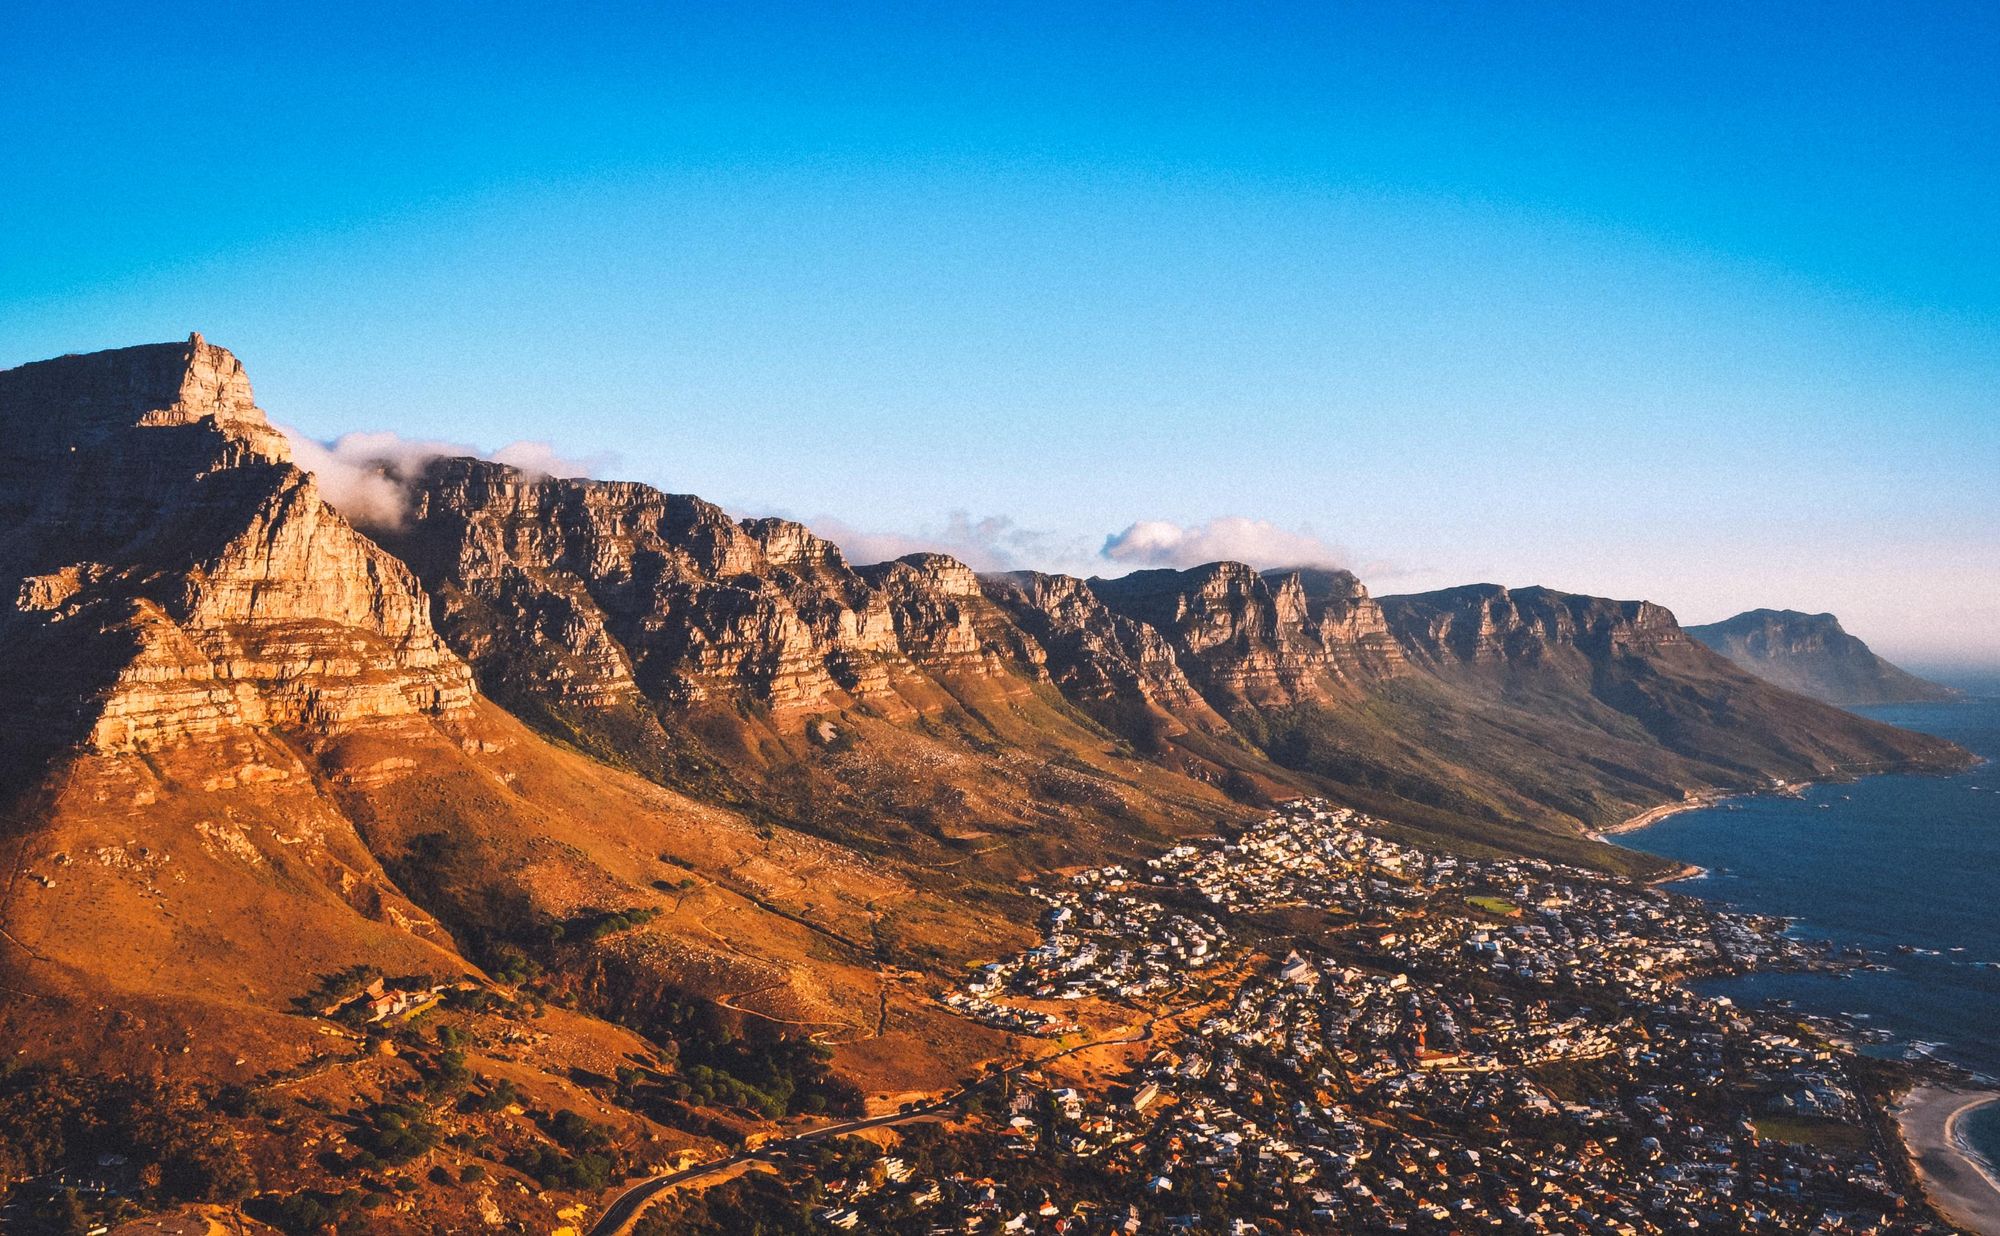 The view from Lion's Head mountain in Cape Town. Photo: Getty